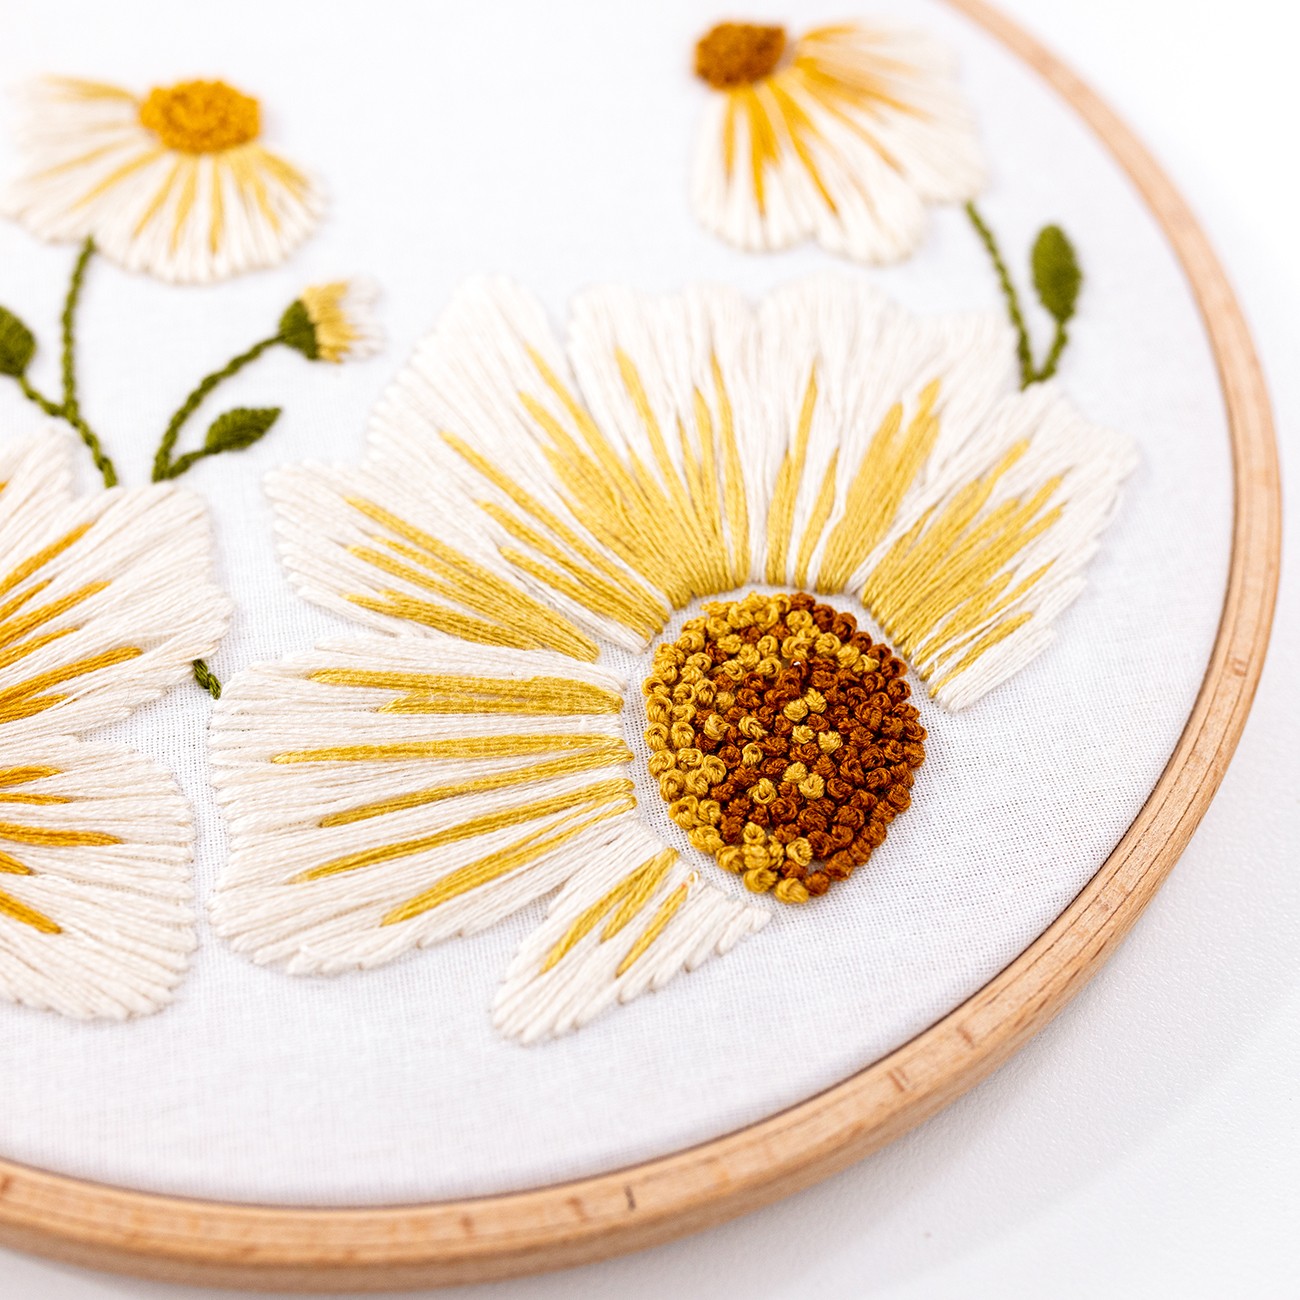 This is an image of the Daisy Blooms Modern Embroidery Pattern, available for purchase from the Clever Poppy Shop.